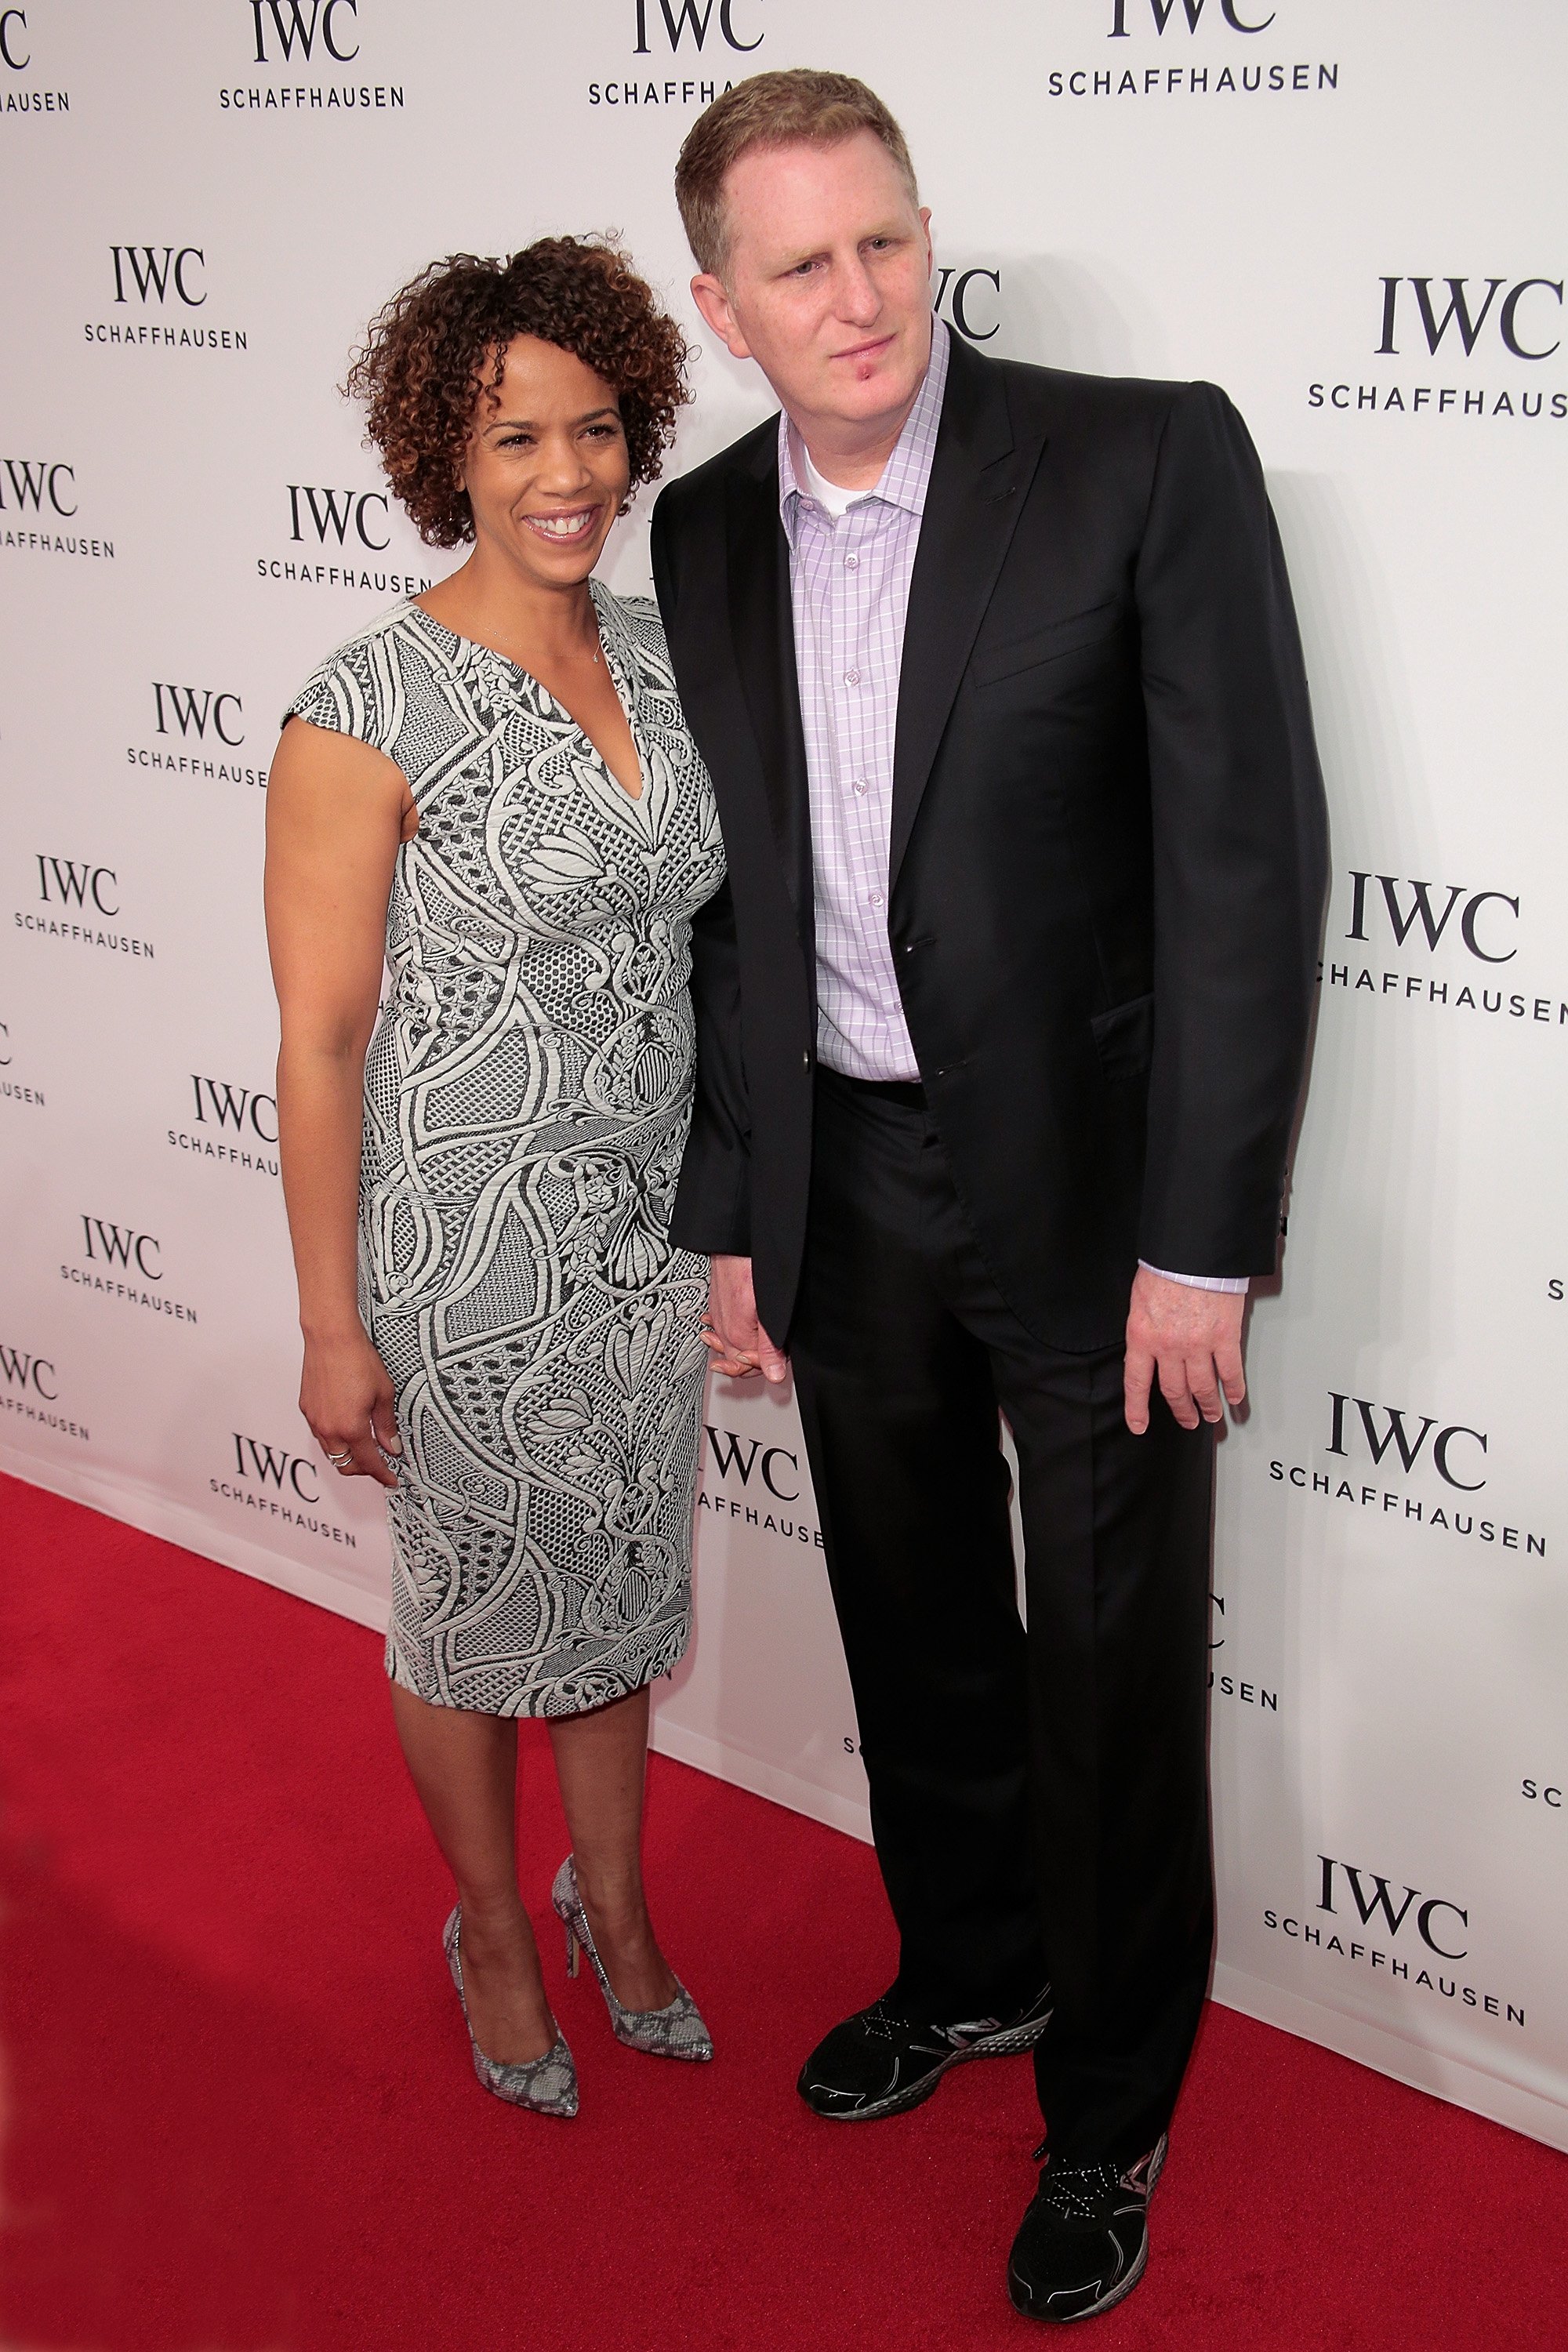 Michael Rapaport and Kebe Dunn pose on the red carpet at the IWC Schaffhausen third annual "For the Love of Cinema" dinner during Tribeca Film Festival at Spring Studios on April 16, 2015, in New York City | Source: Getty Images